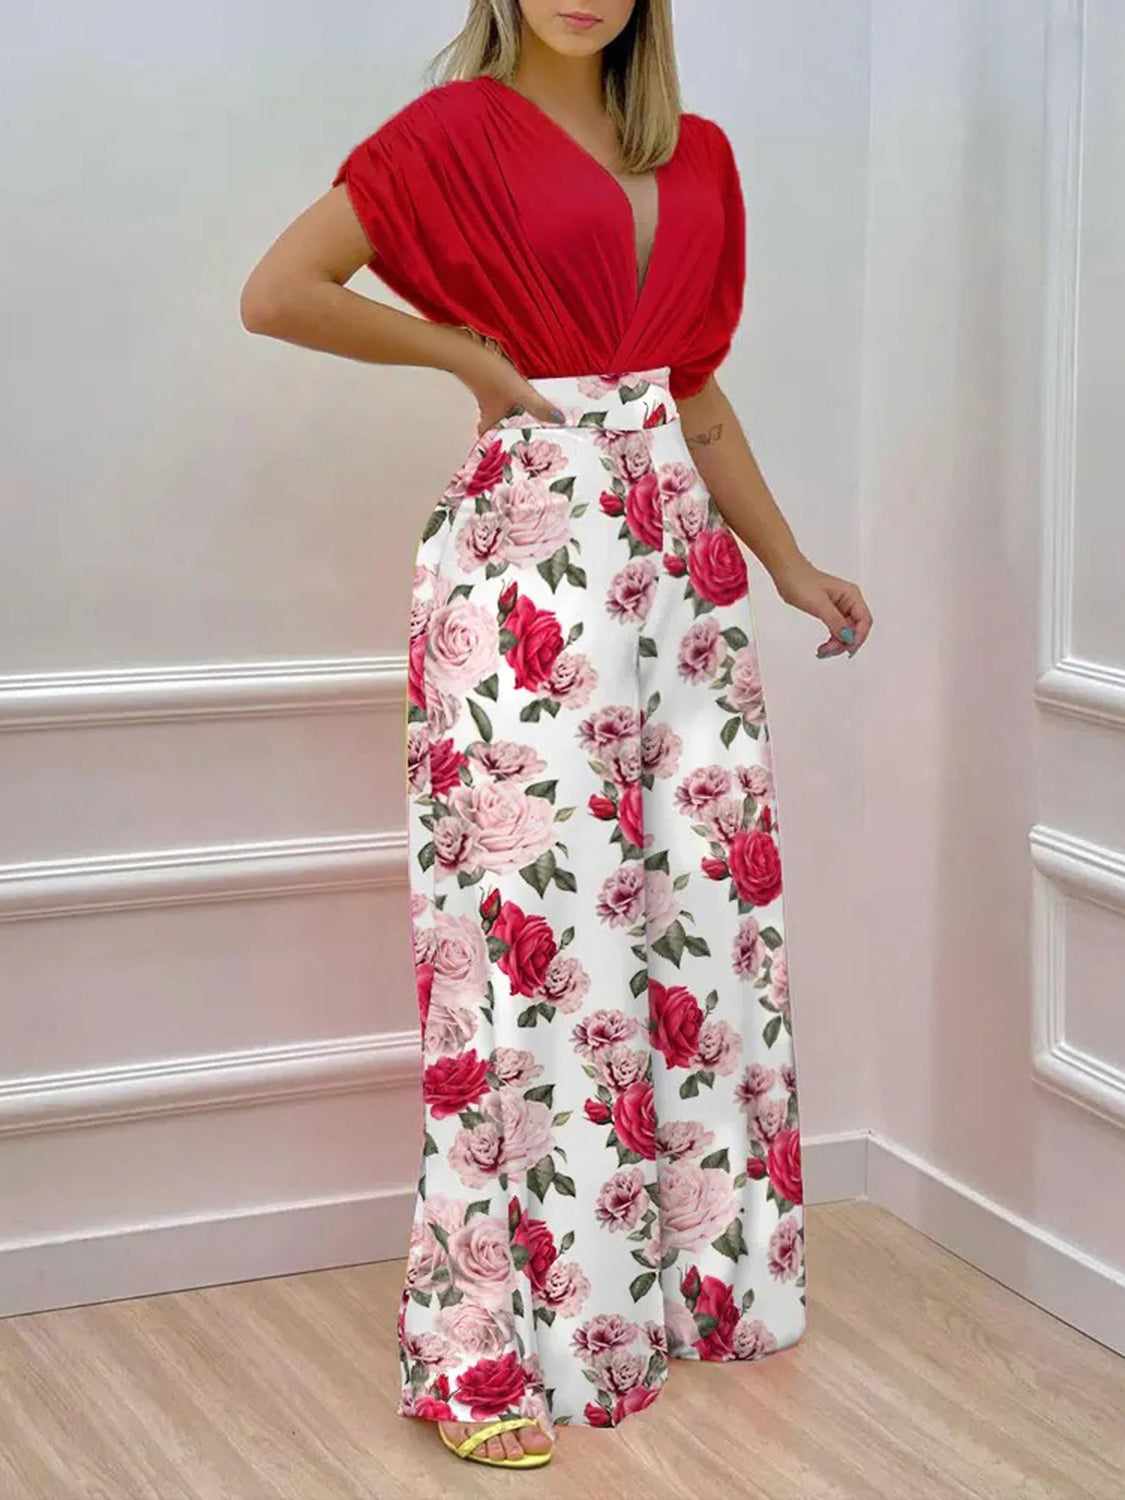 MUST WEAR AN INNER BLOUSE FOR THIS ITEM FOR MODESTY  - Printed Surplice Top and Wide Leg Pants Set